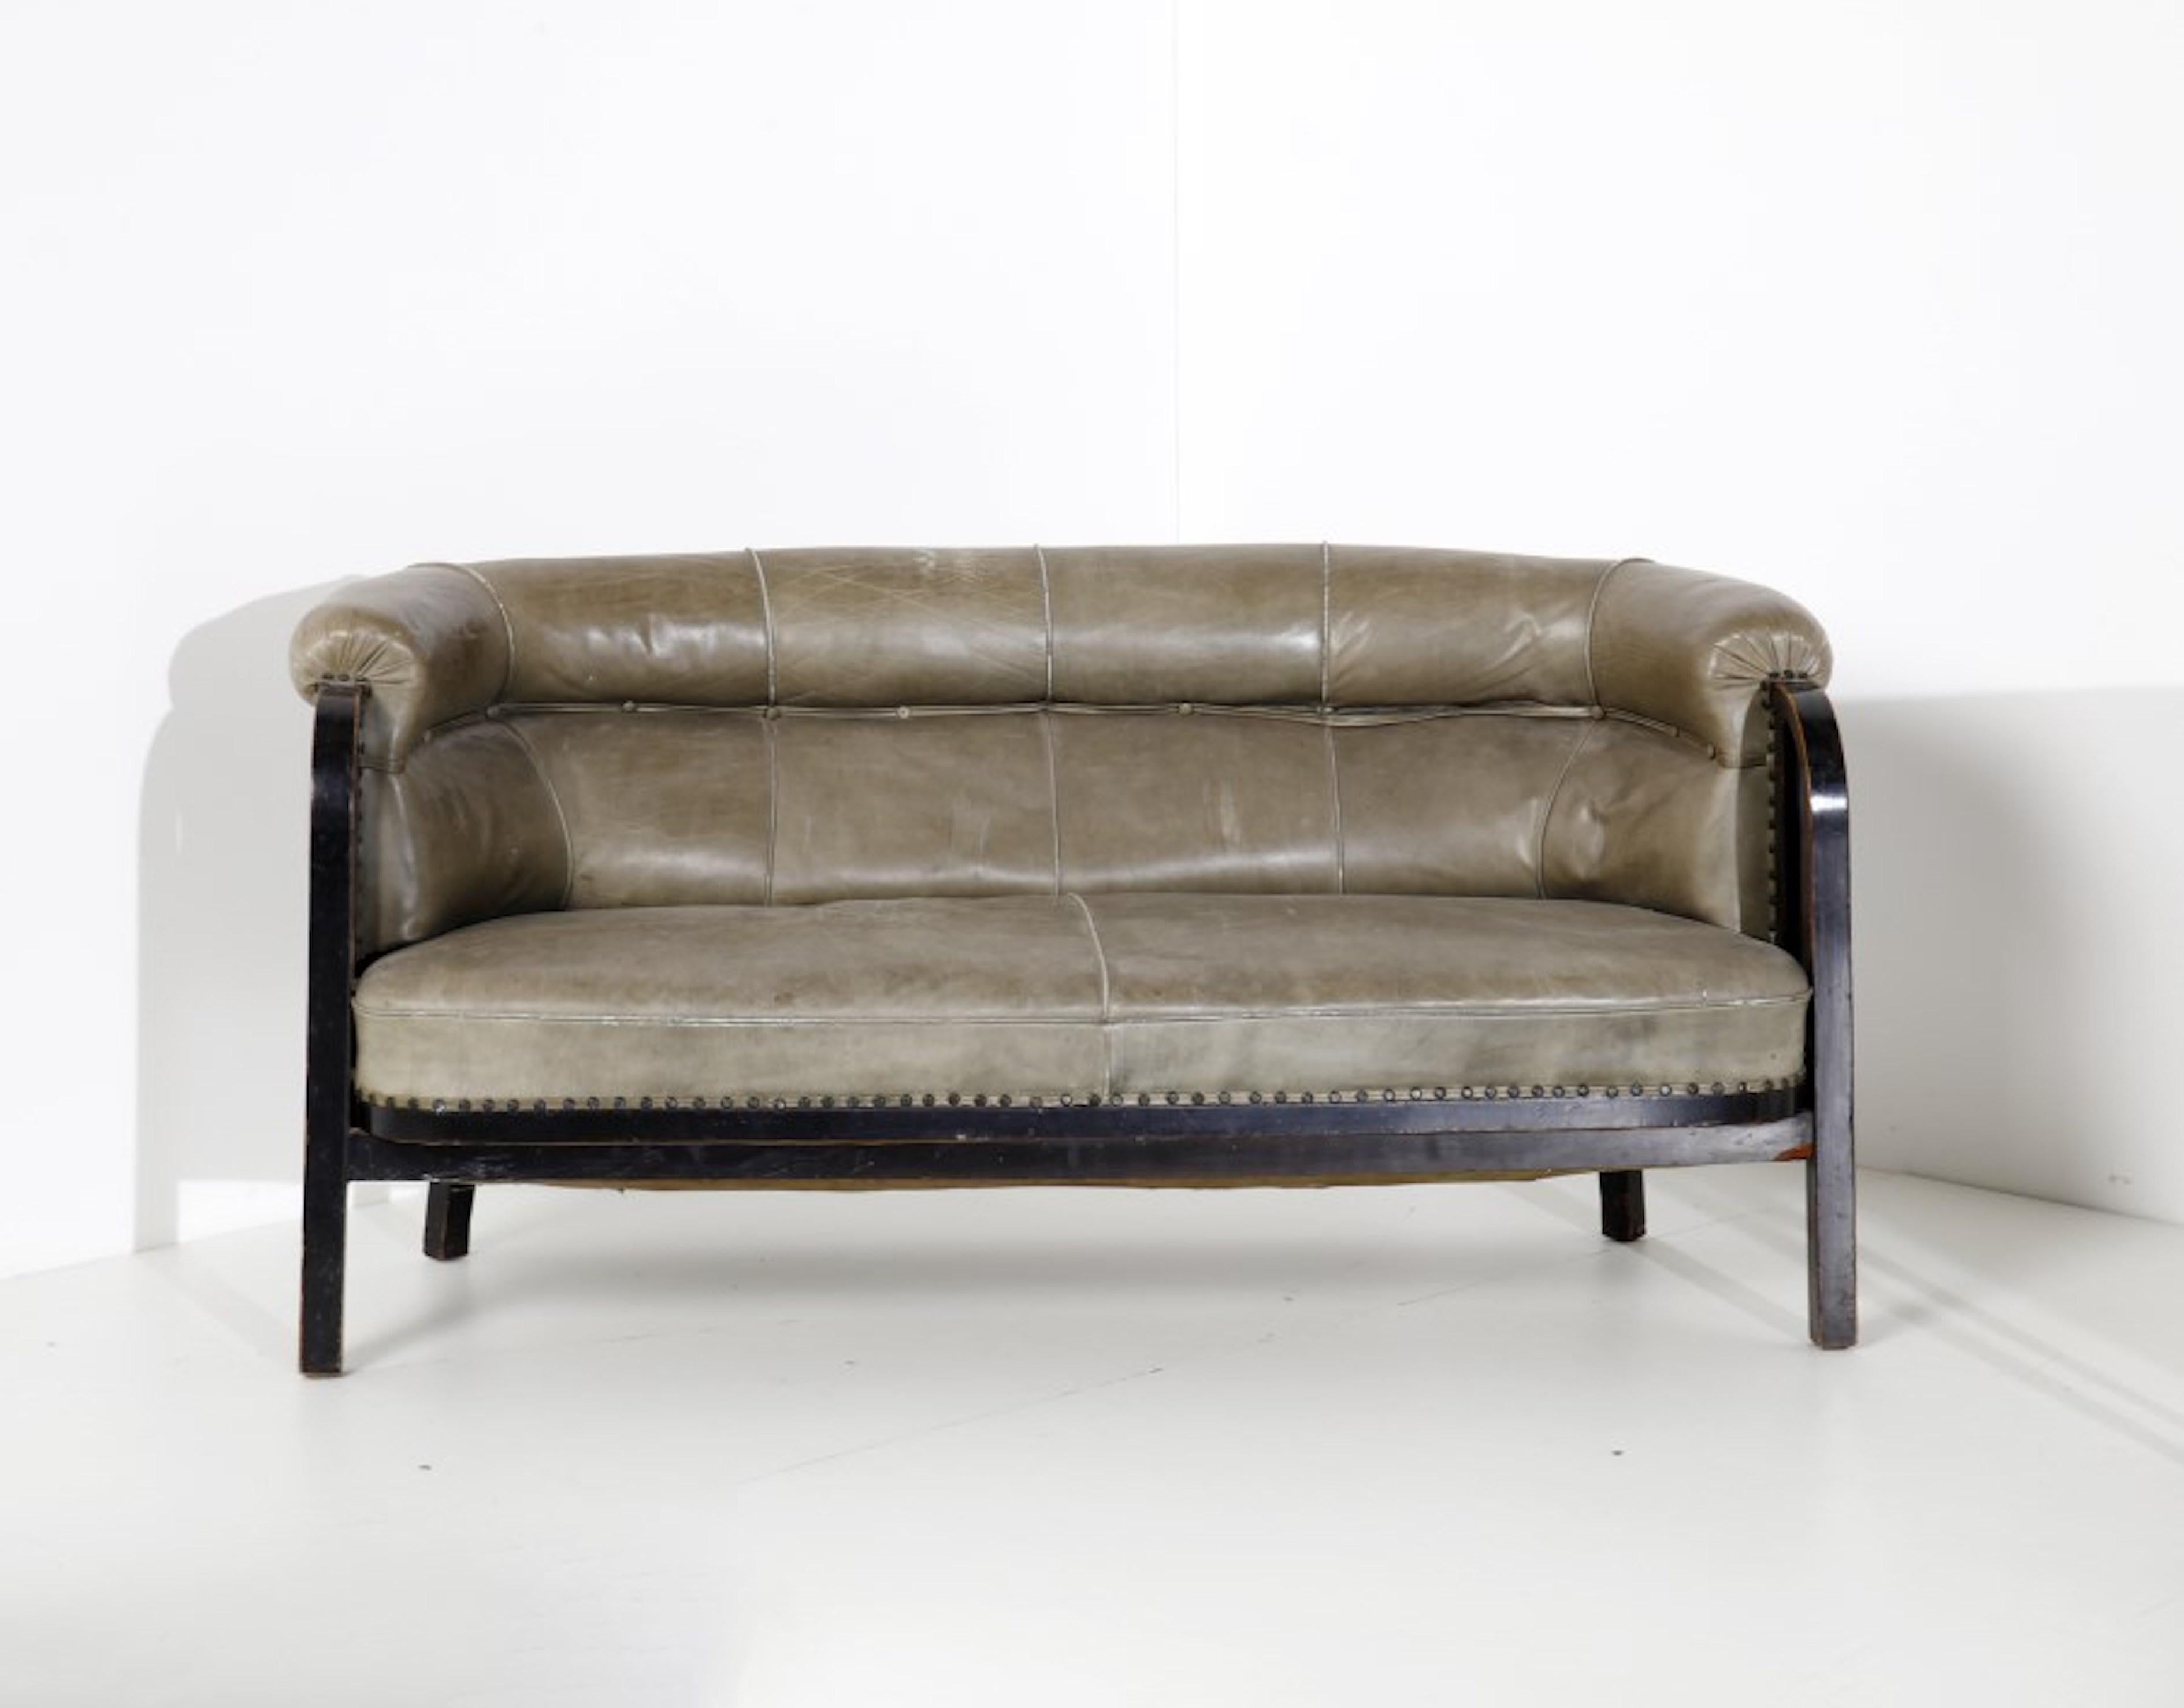 Thonet Sofa Nr. 6533 by Marcel Kammerer, Austria (Vienna),  from 1910

The rare sofa is part of a larger set by the famous Austrian designer Kammerer, which also includes the corresponding armchairs and two chairs. These are truly very rare,